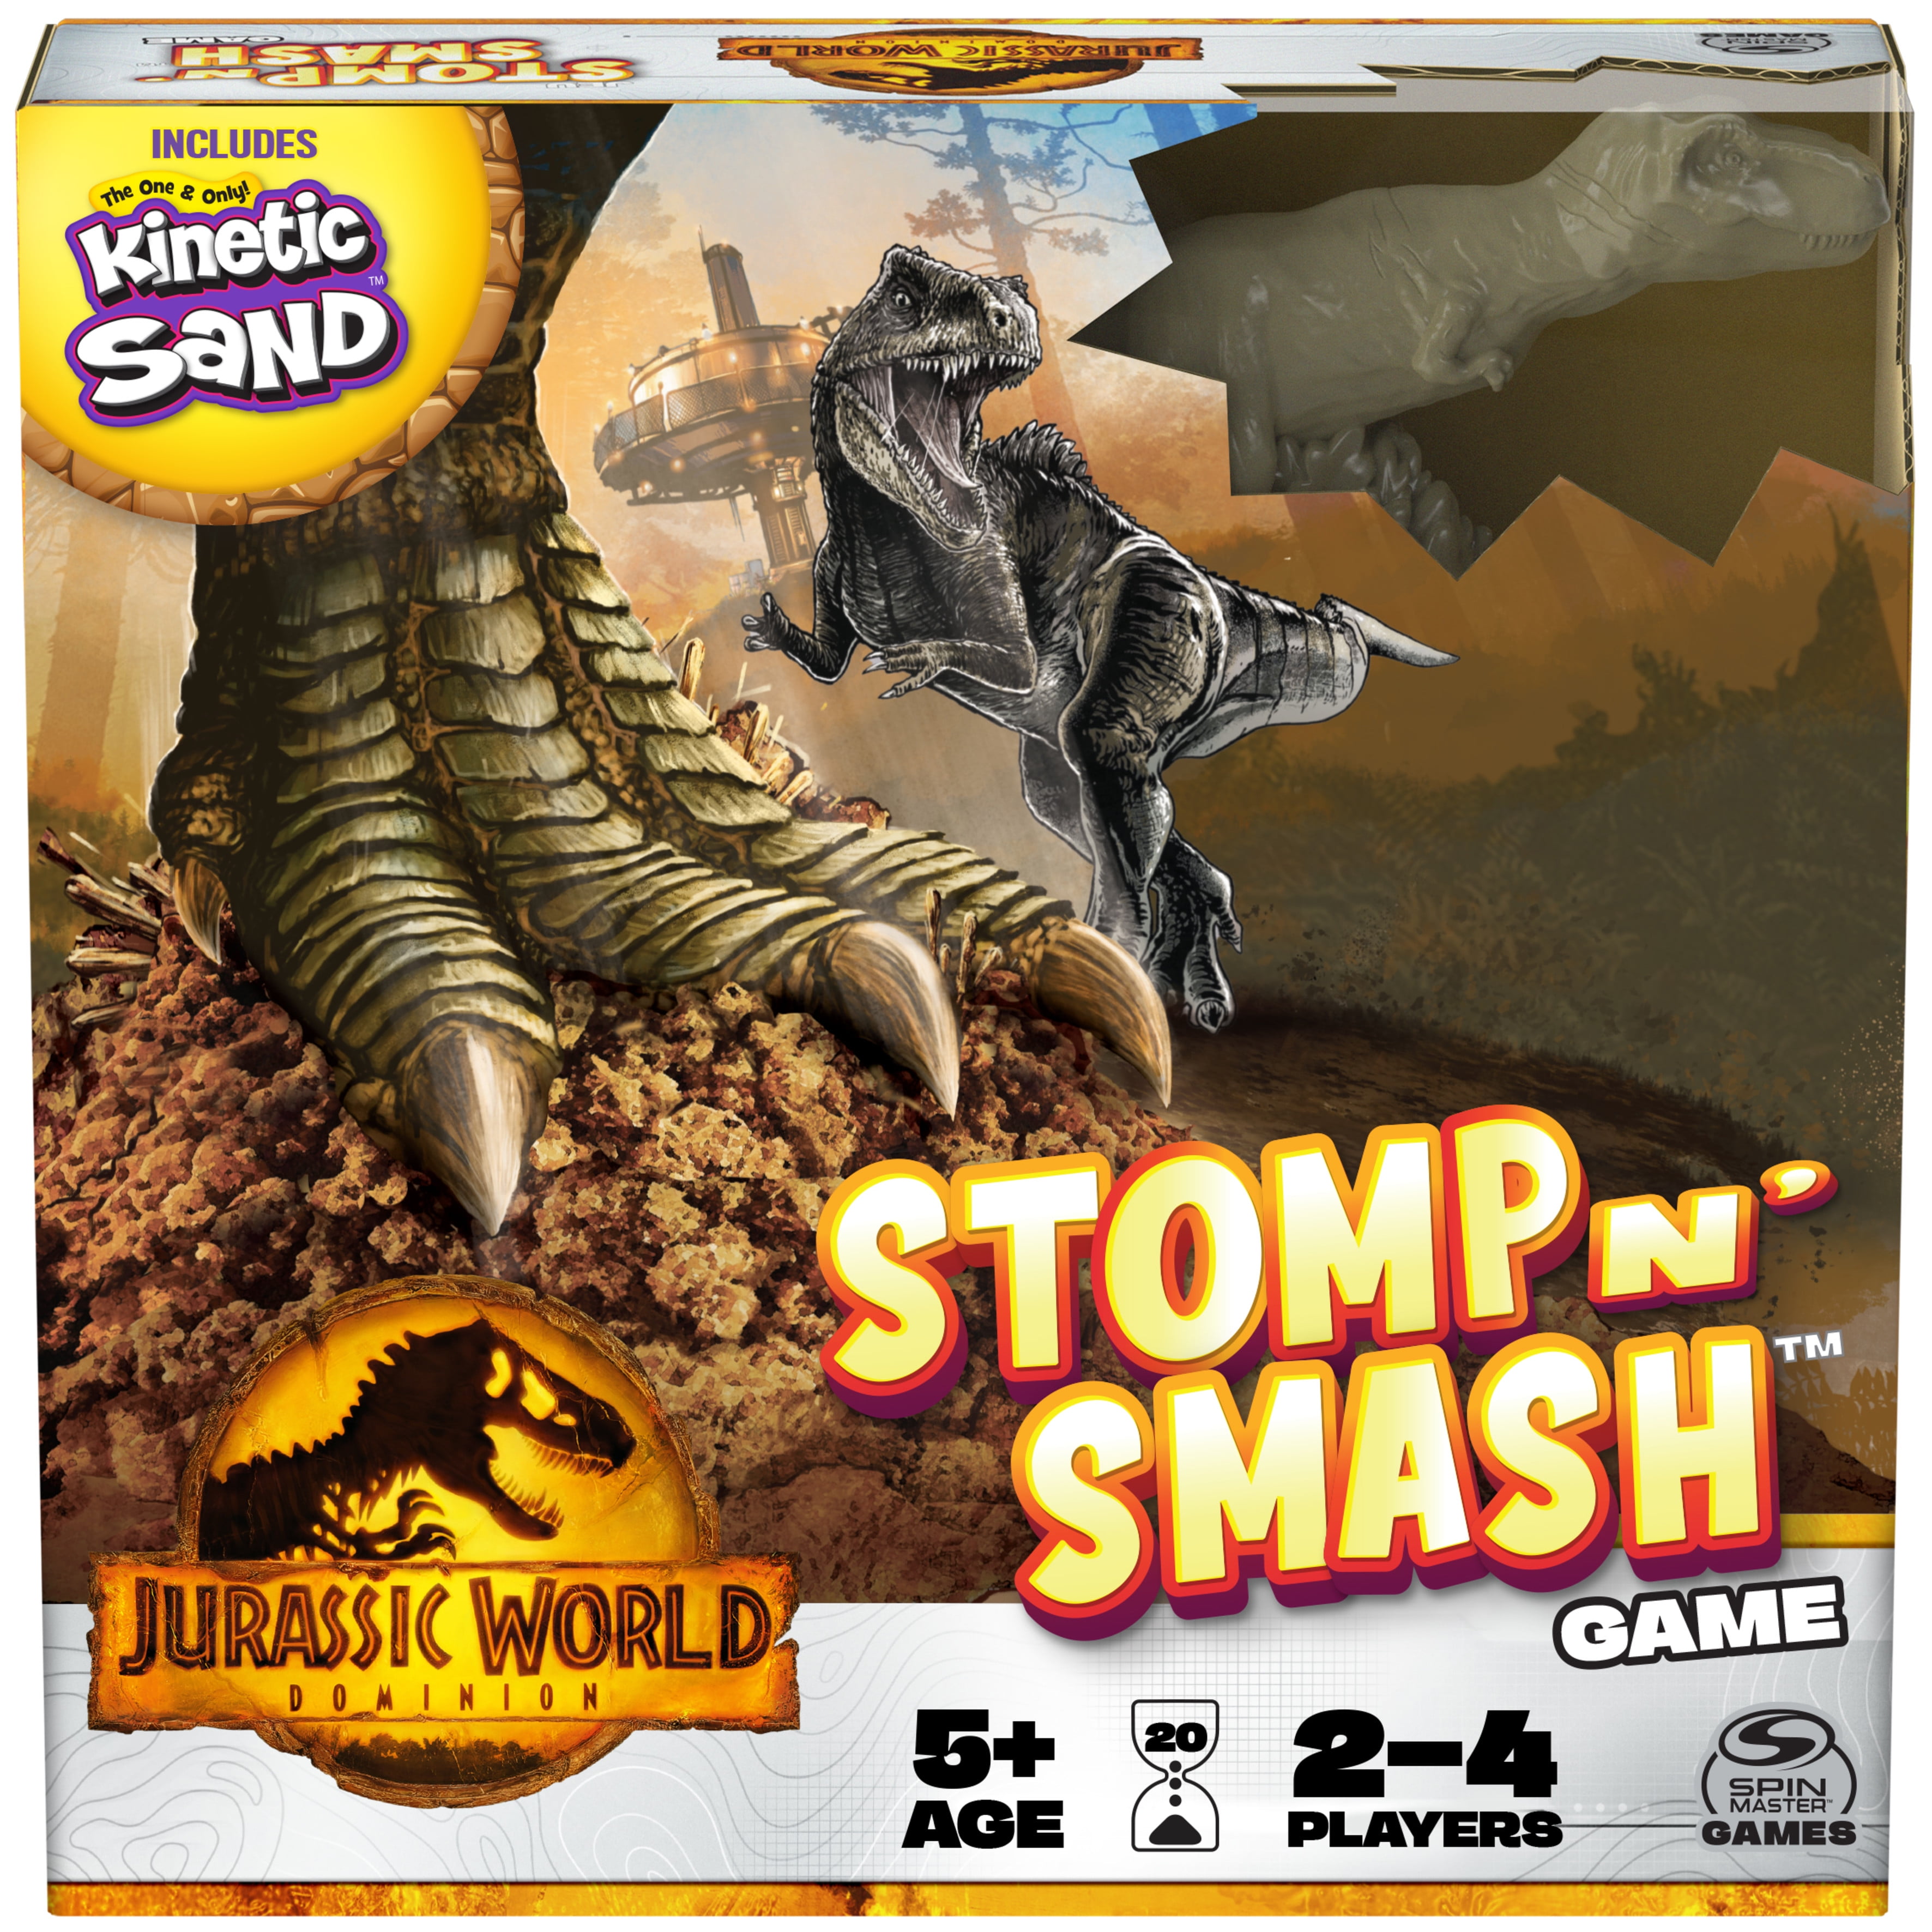 Have more fun on Stomp with these free online games!